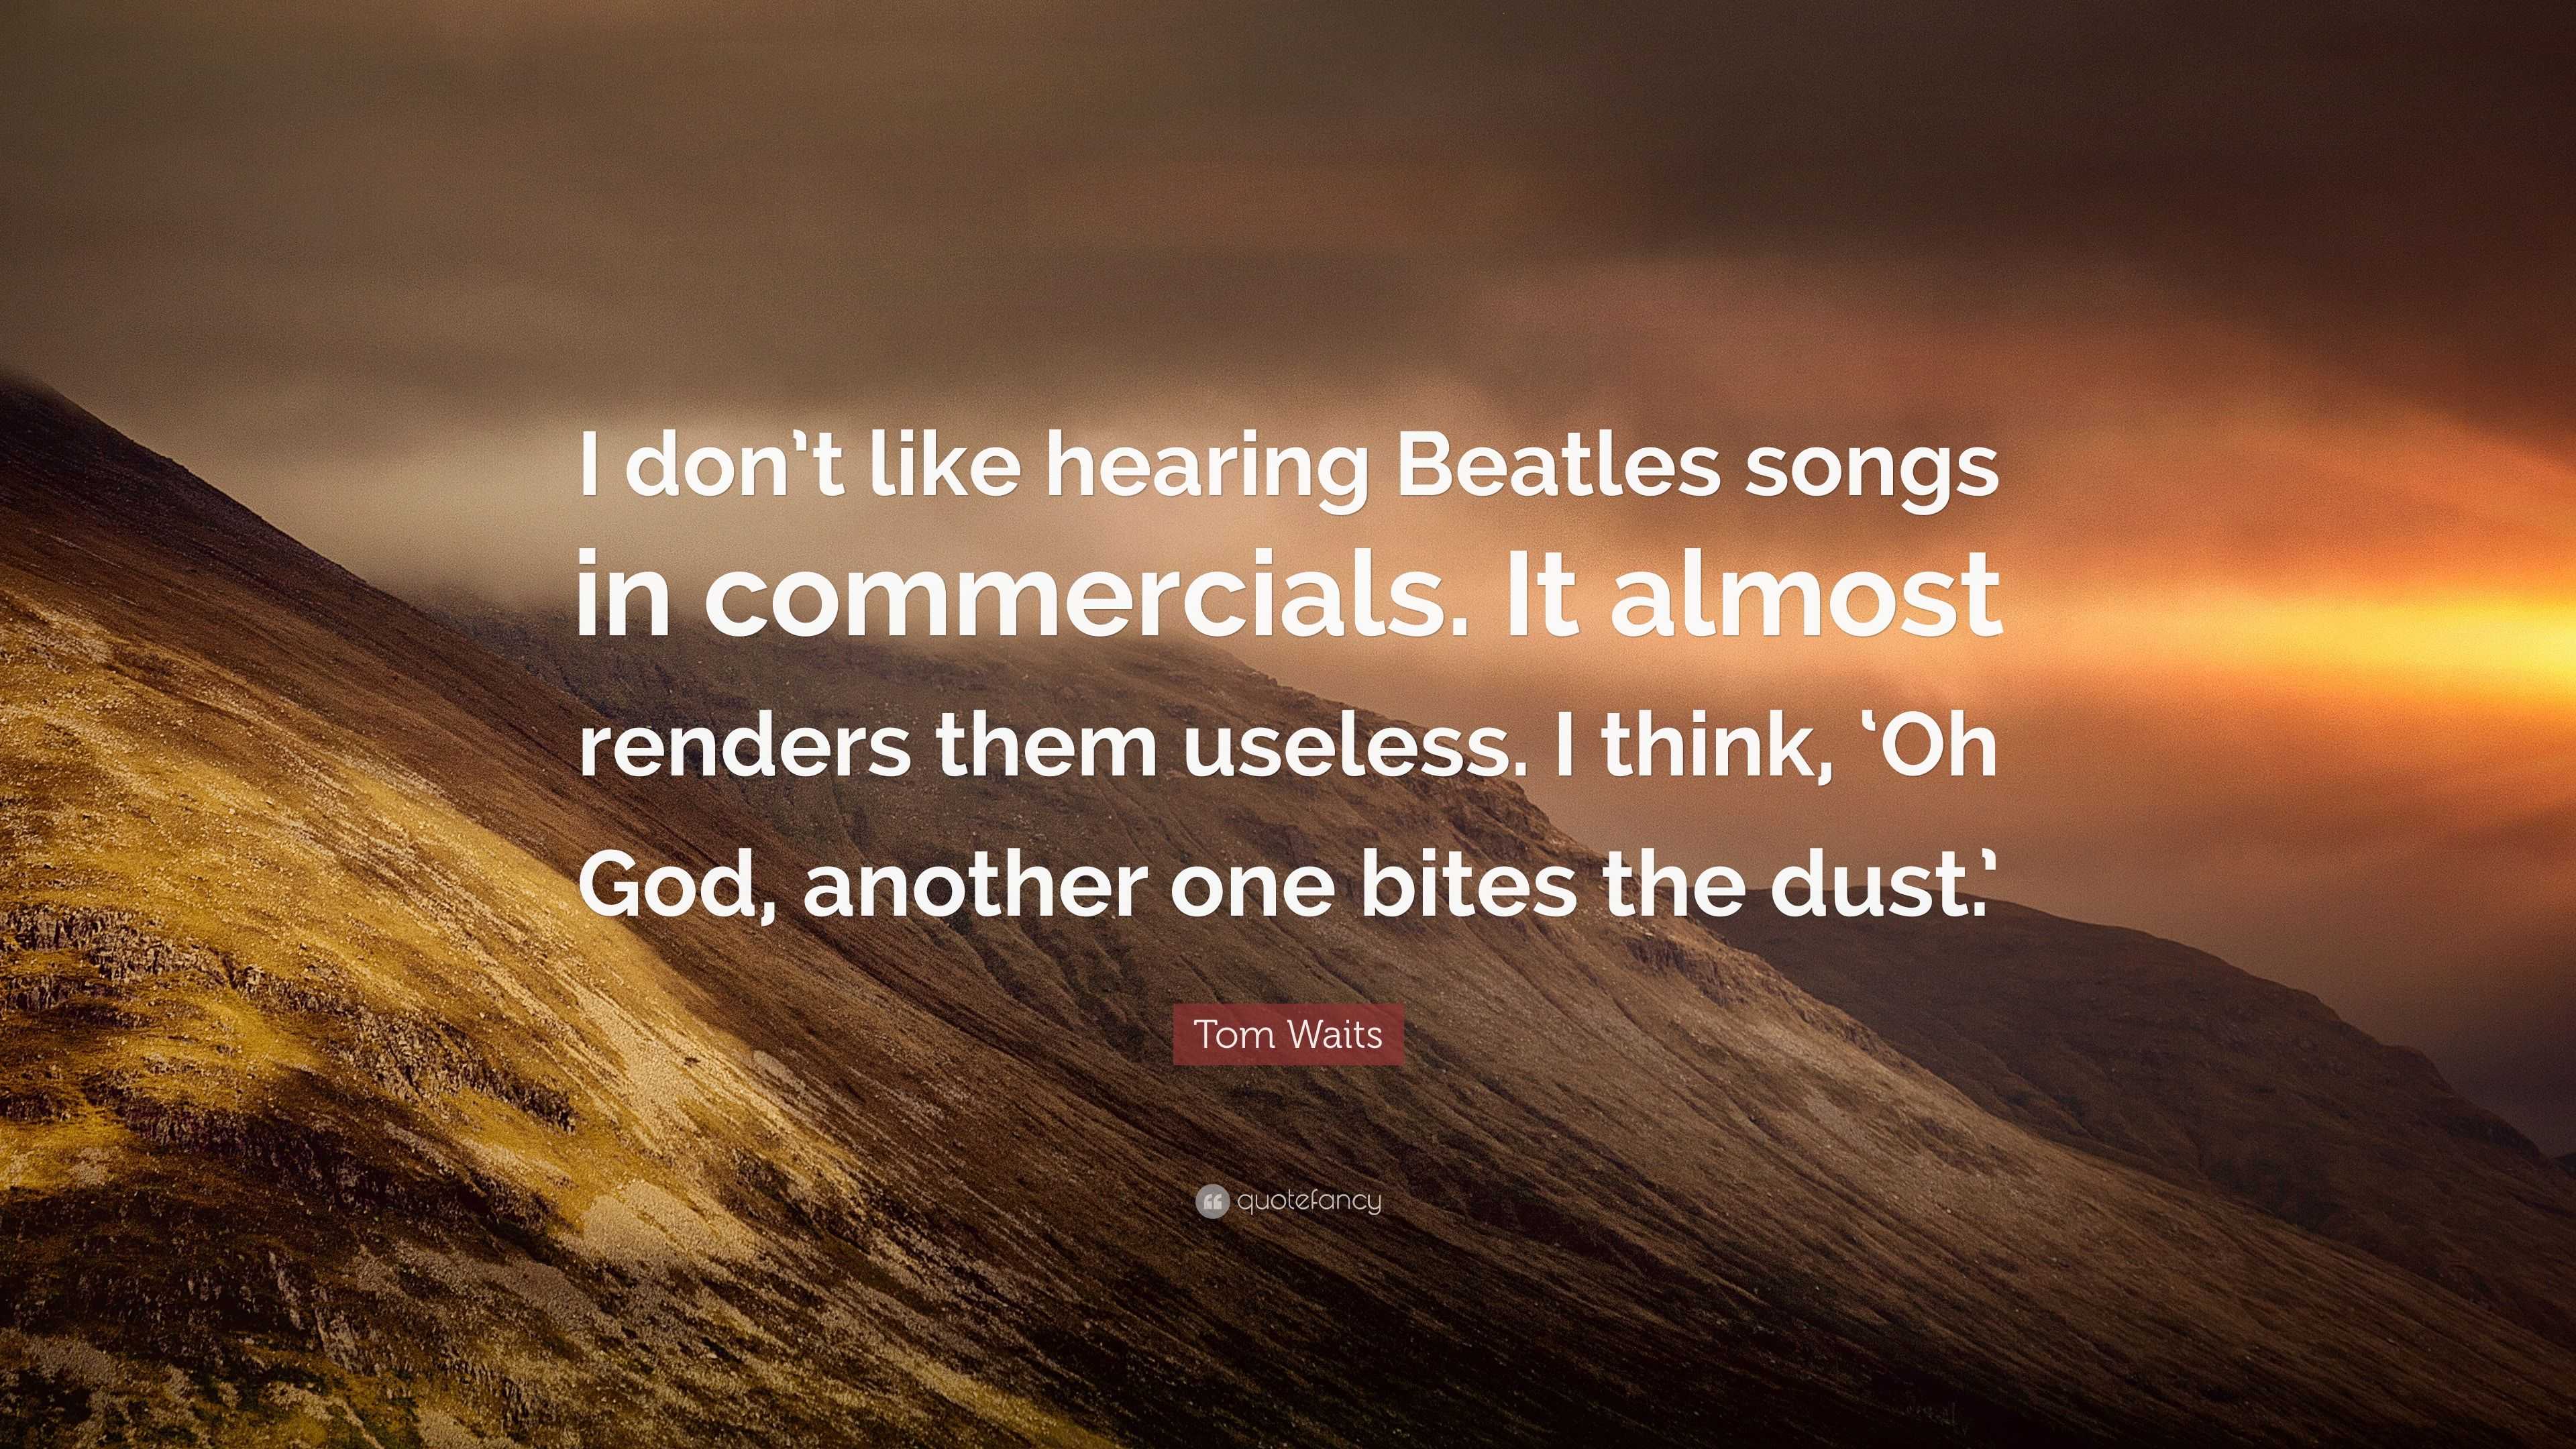 Tom Waits Quote “I don’t like hearing Beatles songs in commercials. It